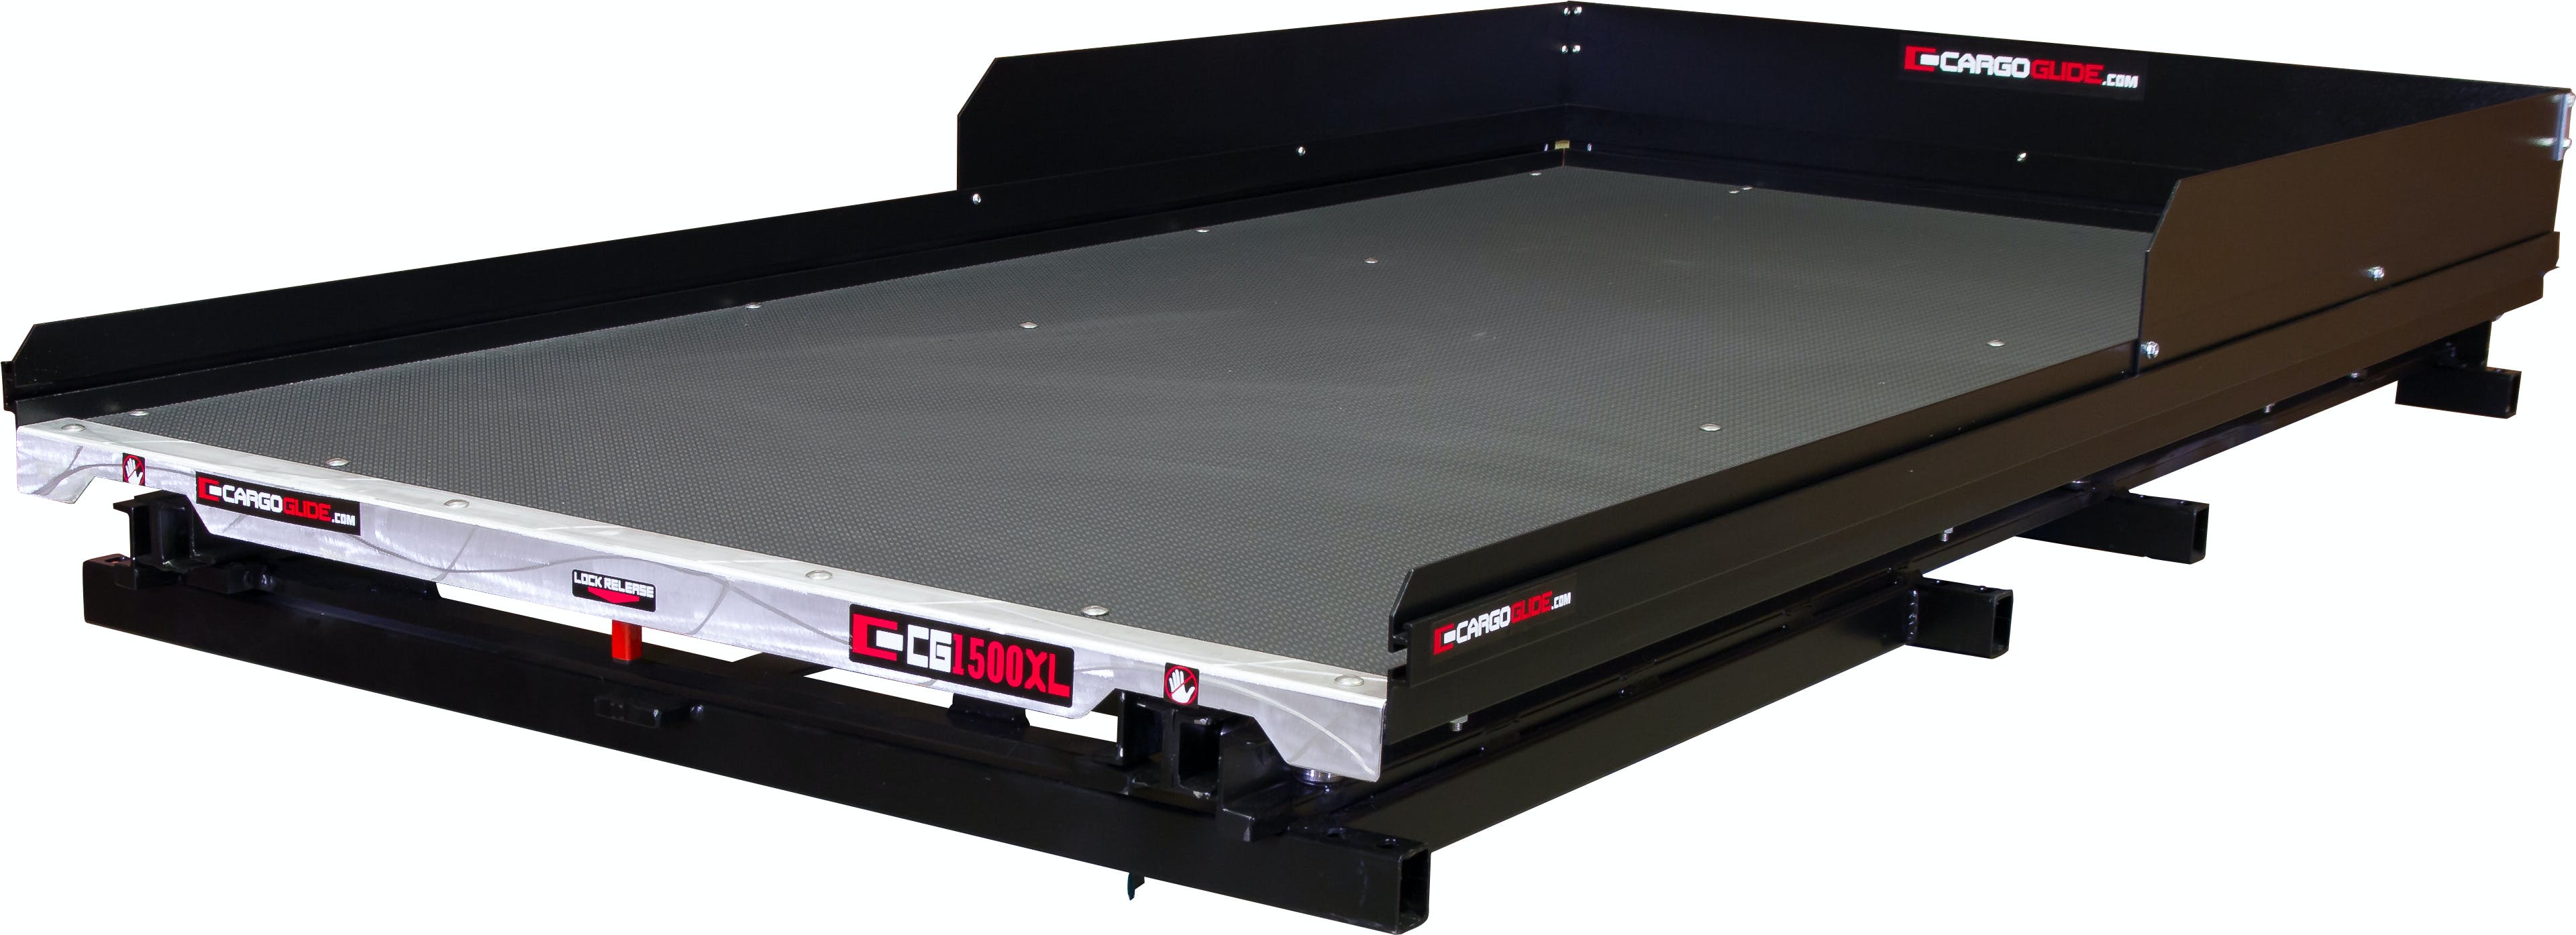 DECKED CG1500XL-6348 Slide Out Cargo Tray, 1500lb capacity, 100% ext 28 bearings, Alum Tie-Down Rails